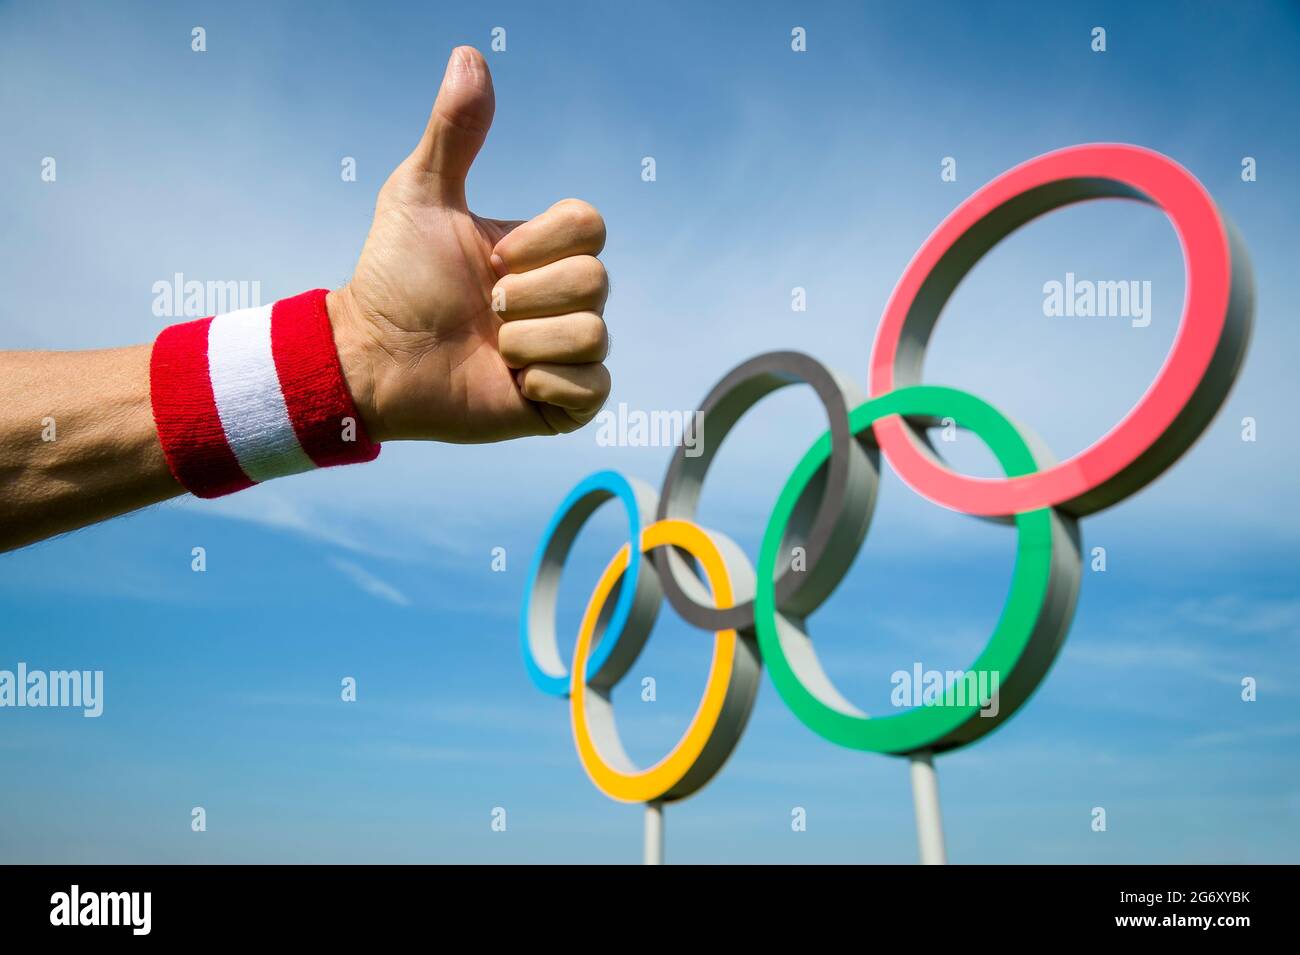 RIO DE JANEIRO - MAY 4, 2016: Japanese athlete's hand wearing red and white  wristband gives a thumbs-up gesture in front of Olympic Rings standing un Stock Photo